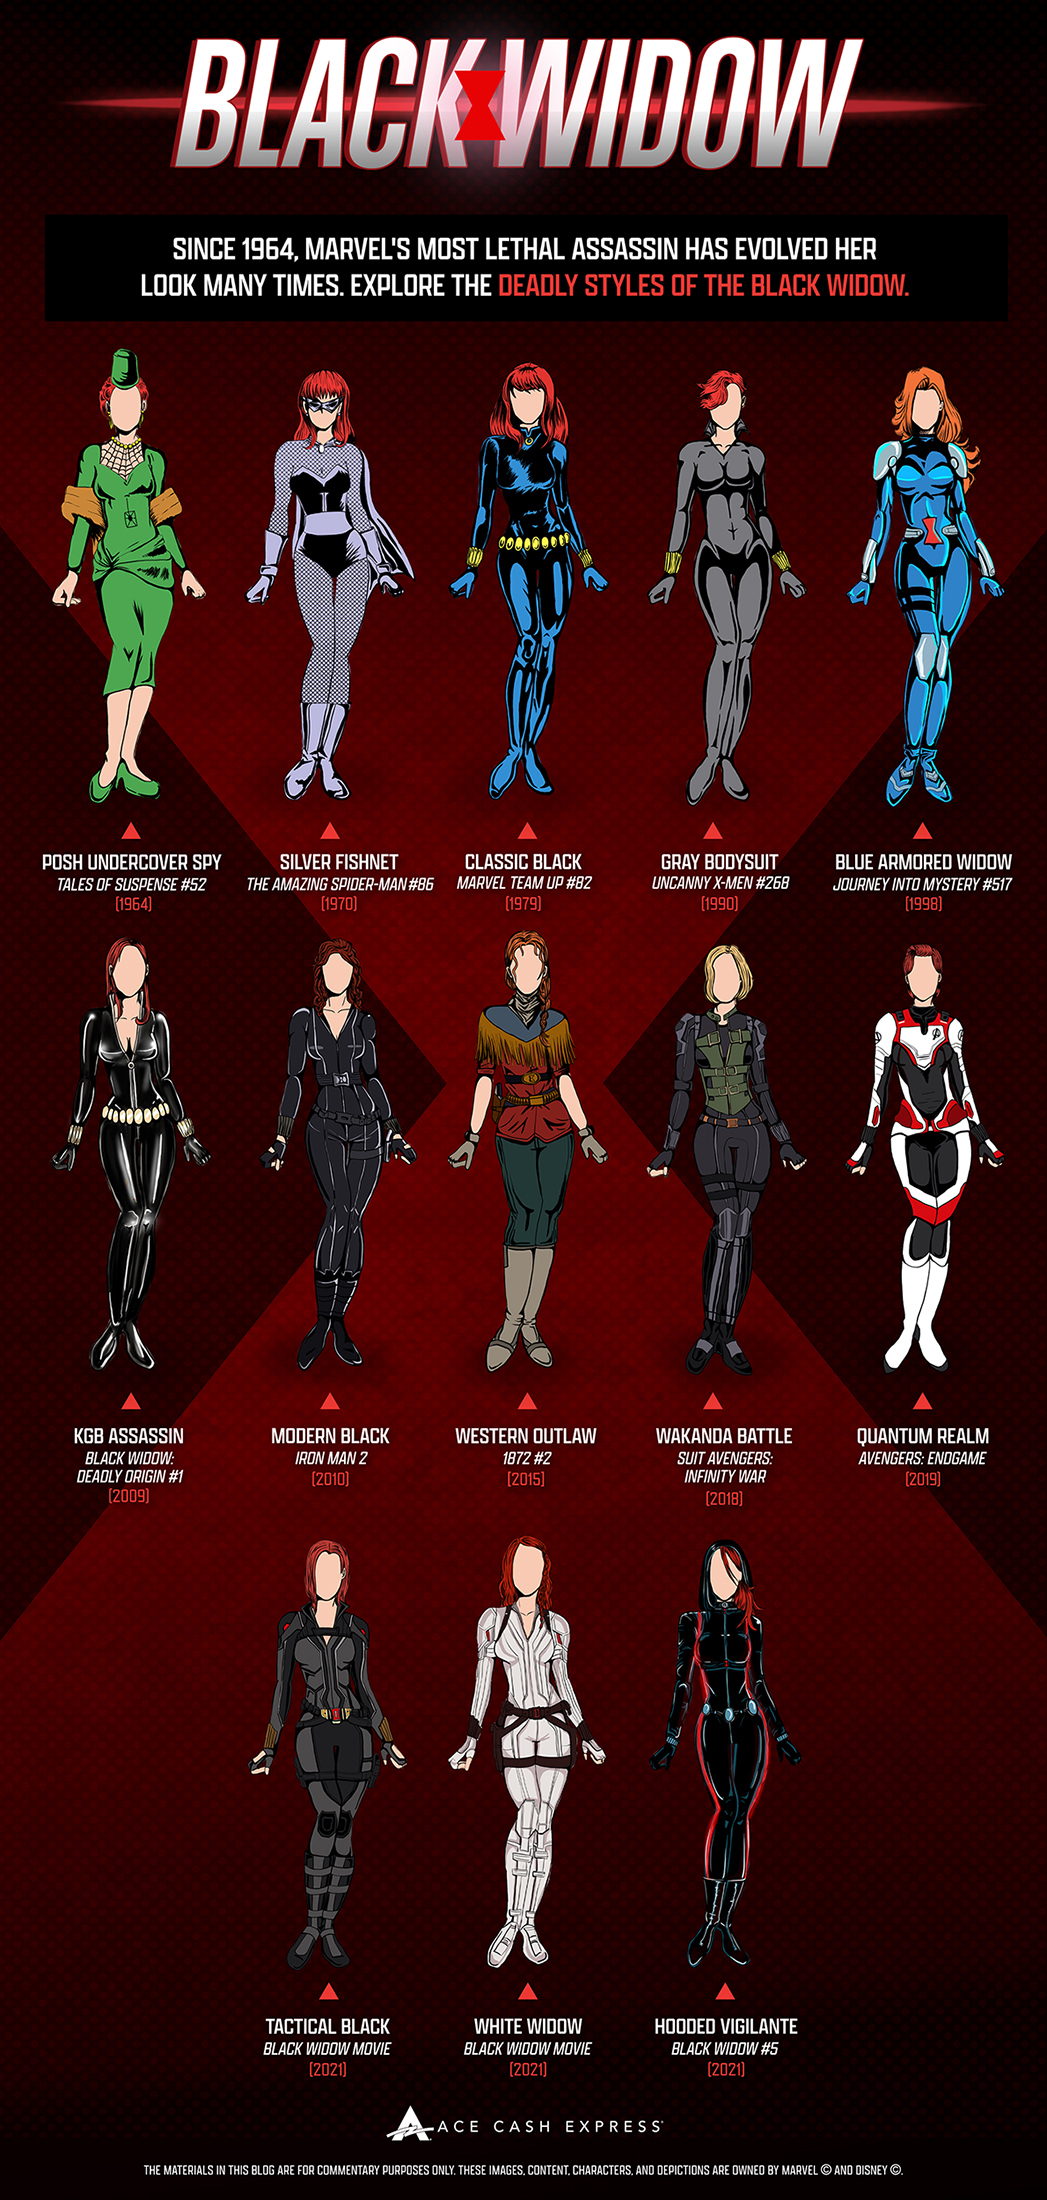 57 Years of Black Widow: Her Origin and Abilities Explained Infographic